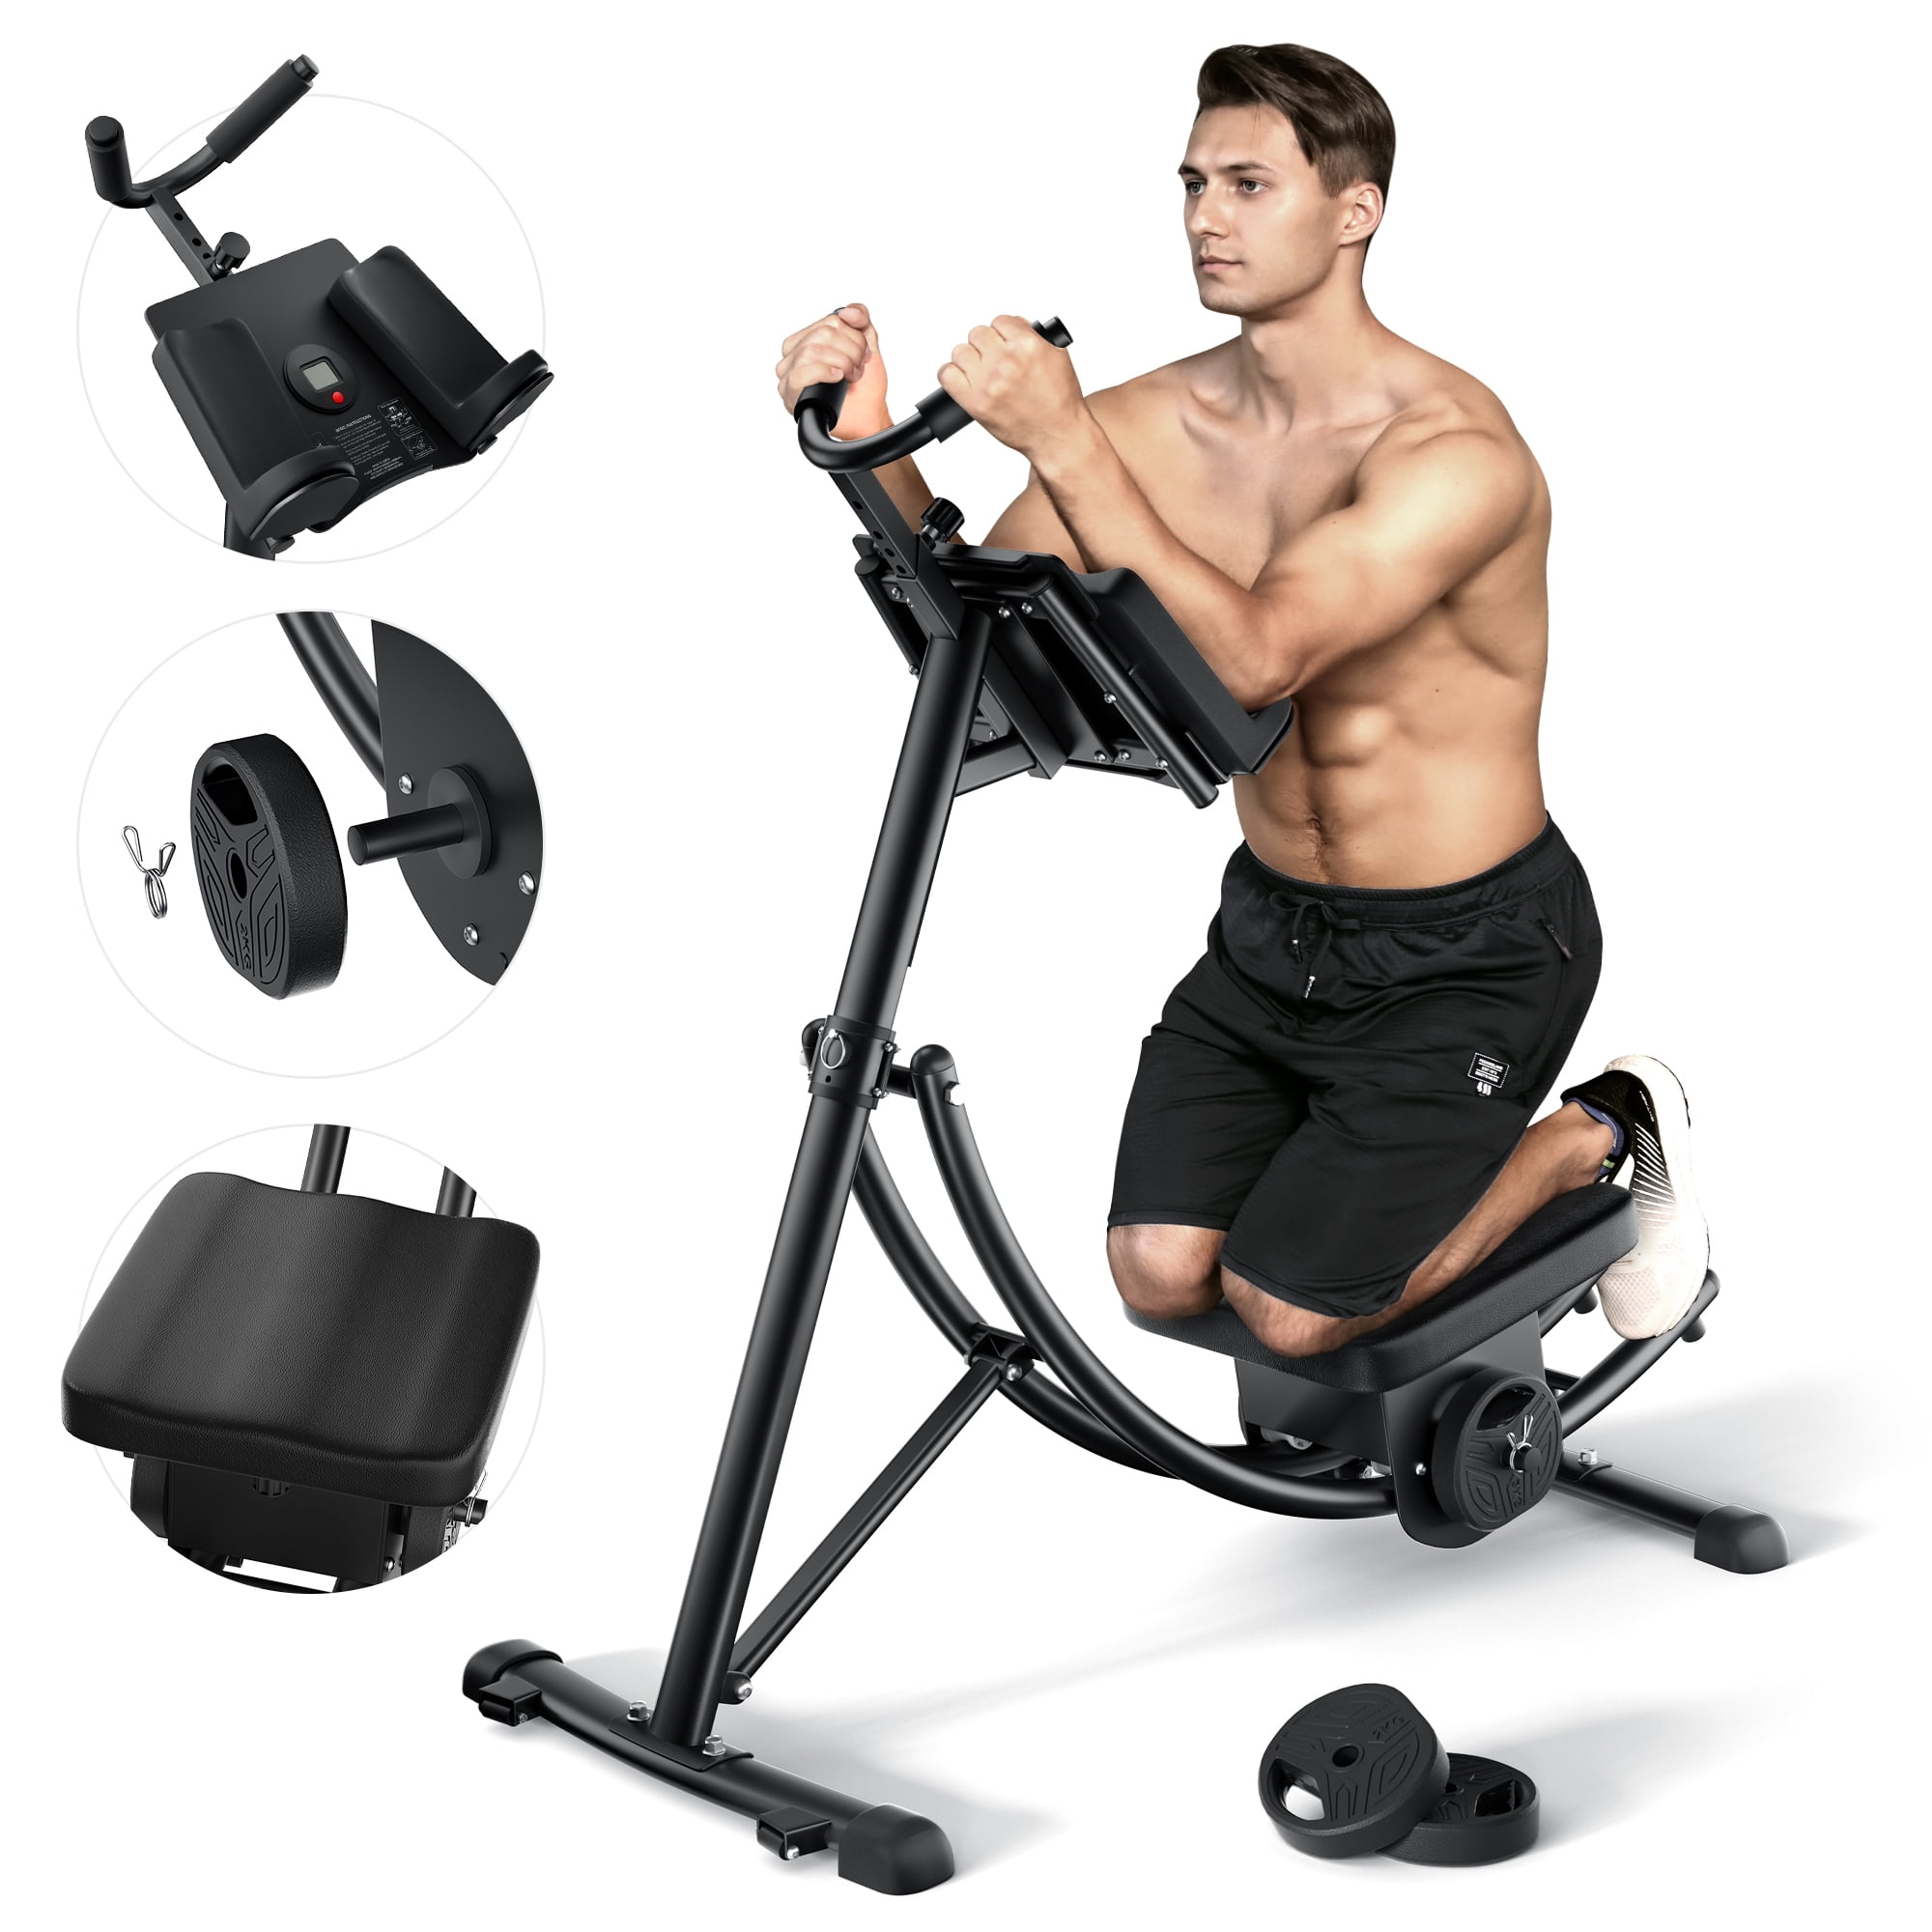 Abs Abdominal Exercise Machine Ab Crunch Fitness Body Muscle Workout N –  XtremepowerUS